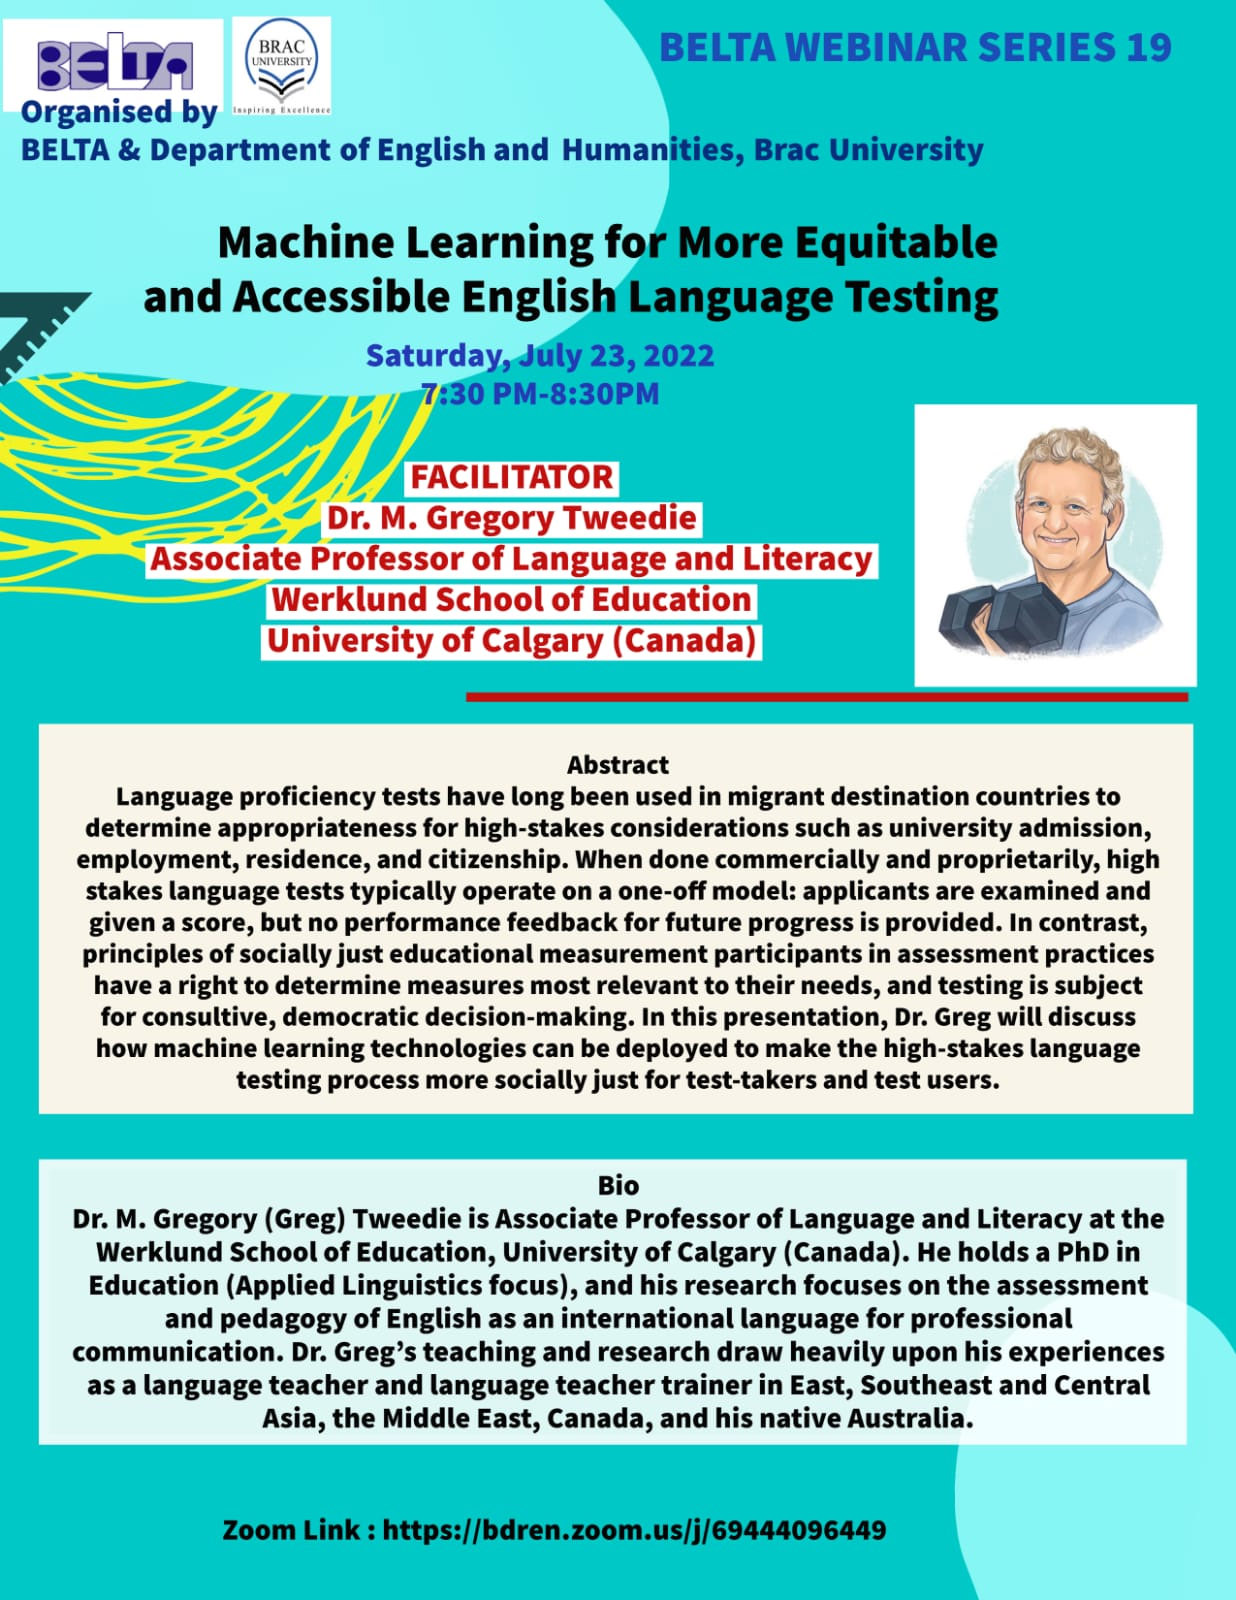 Machine Learning for More Equitable and Accessible English Language Testing